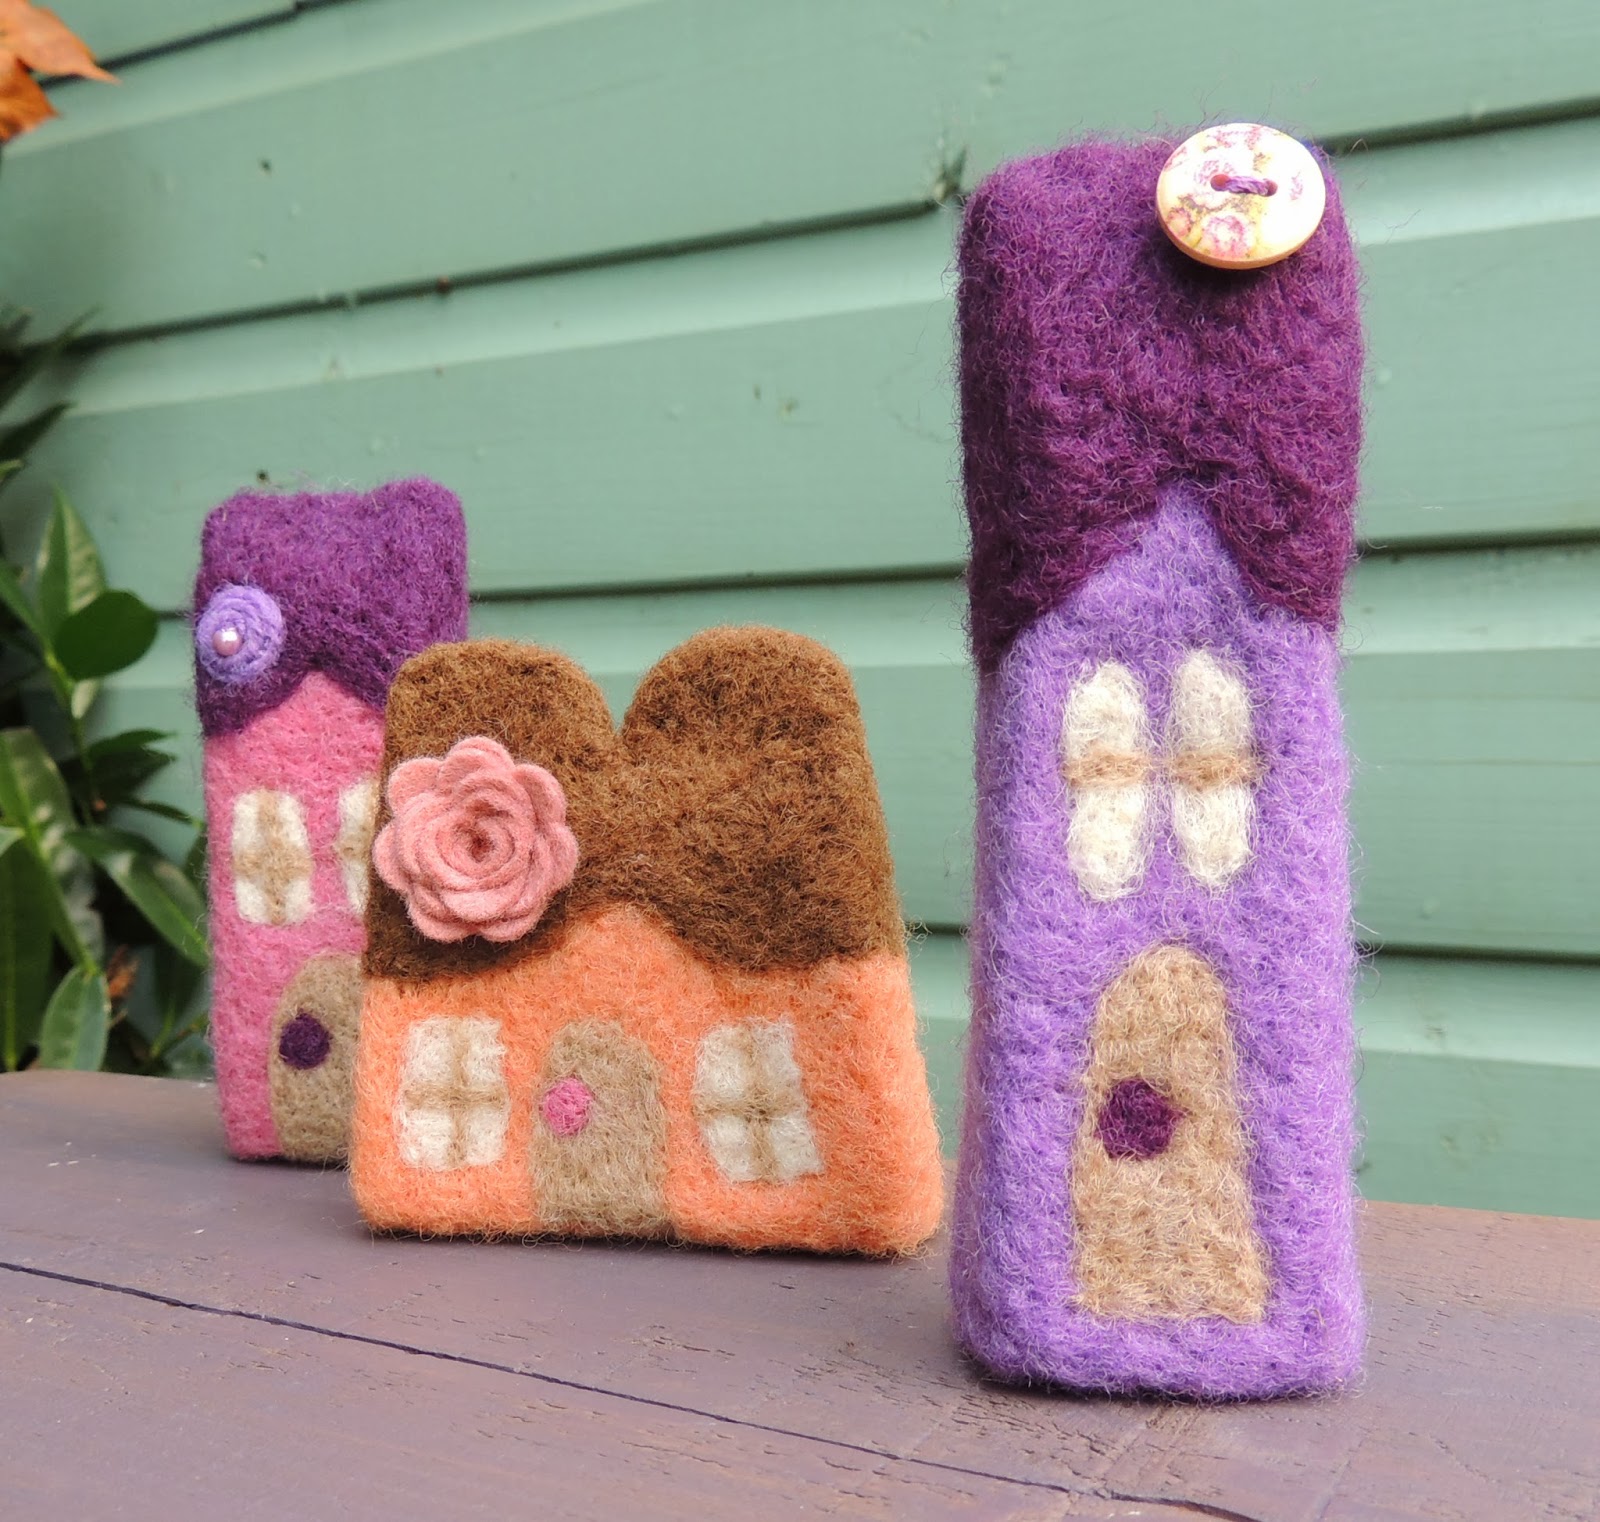 http://www.tigerlilymakes.co.uk/catalogue/4581823965/Needle-Felted-Cottage-Collection/7270887